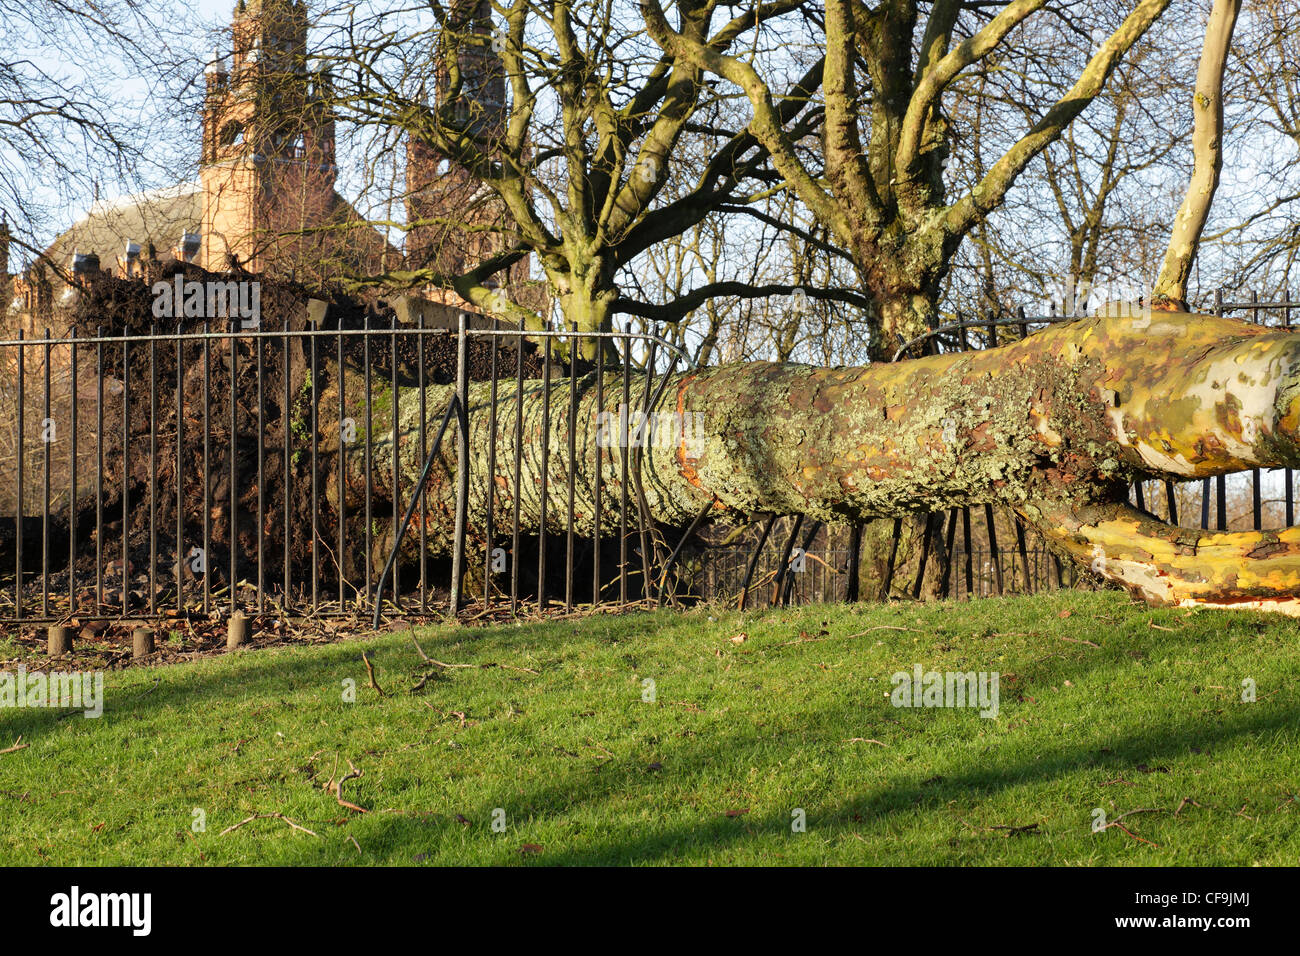 Damage to a metal fence caused by a tree blown over in a winter storm, Kelvin Way, Glasgow west end, Scotland, UK Stock Photo